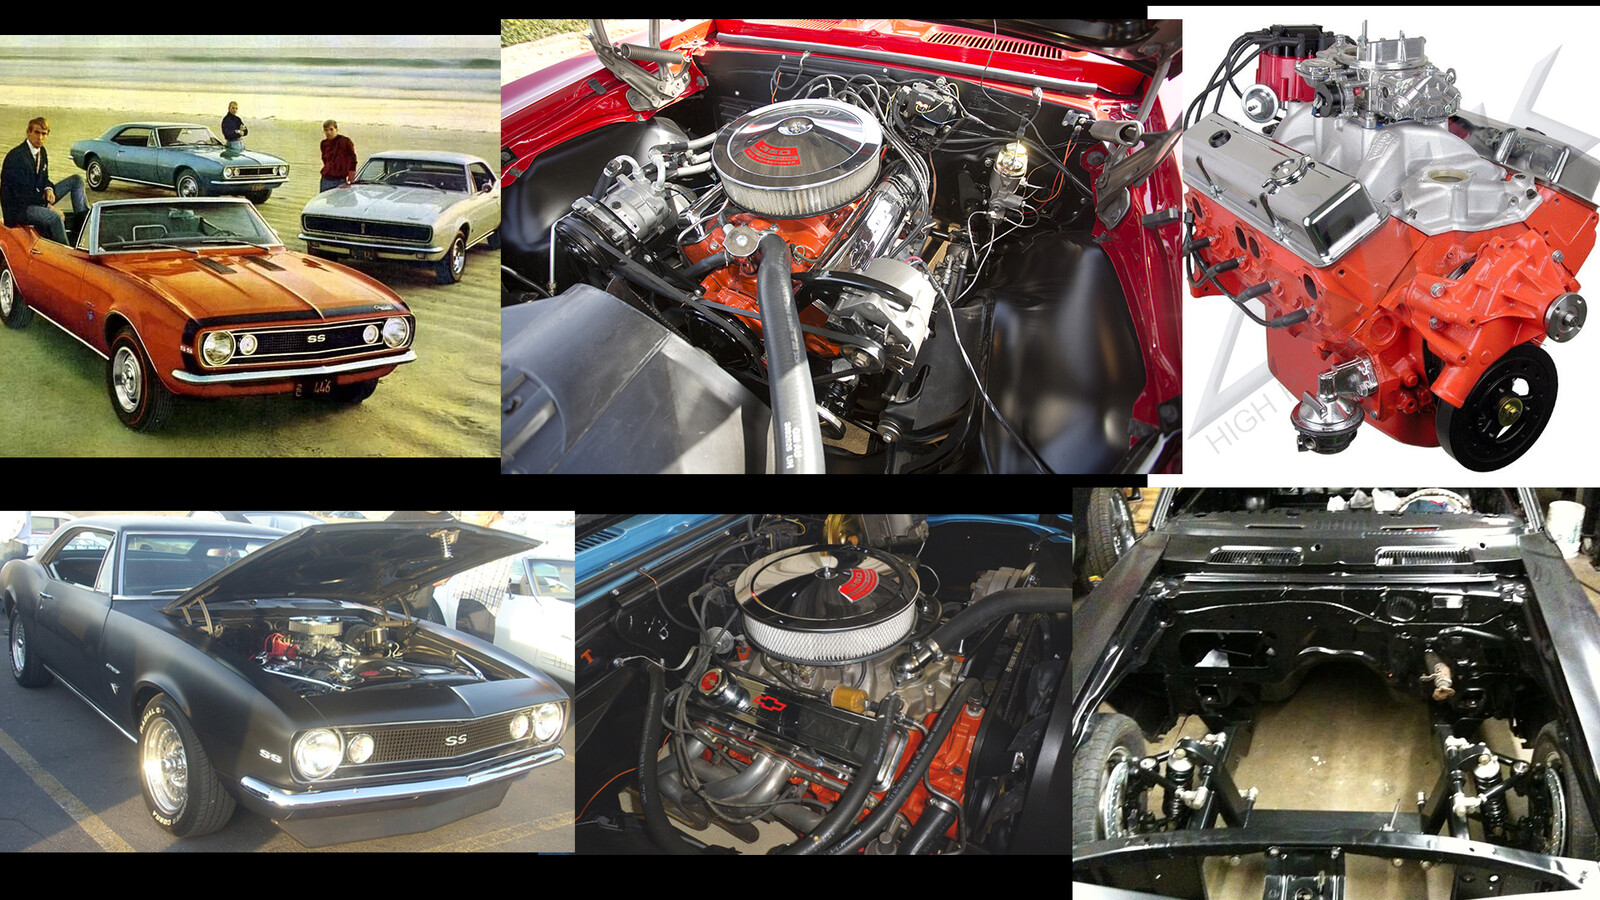 In order to gain a proper idea of what a 1967 Camaro originally looked like, I referenced it's original advertisements. I also looked at a variety of engine compartments since they are typically modified by those who own them.